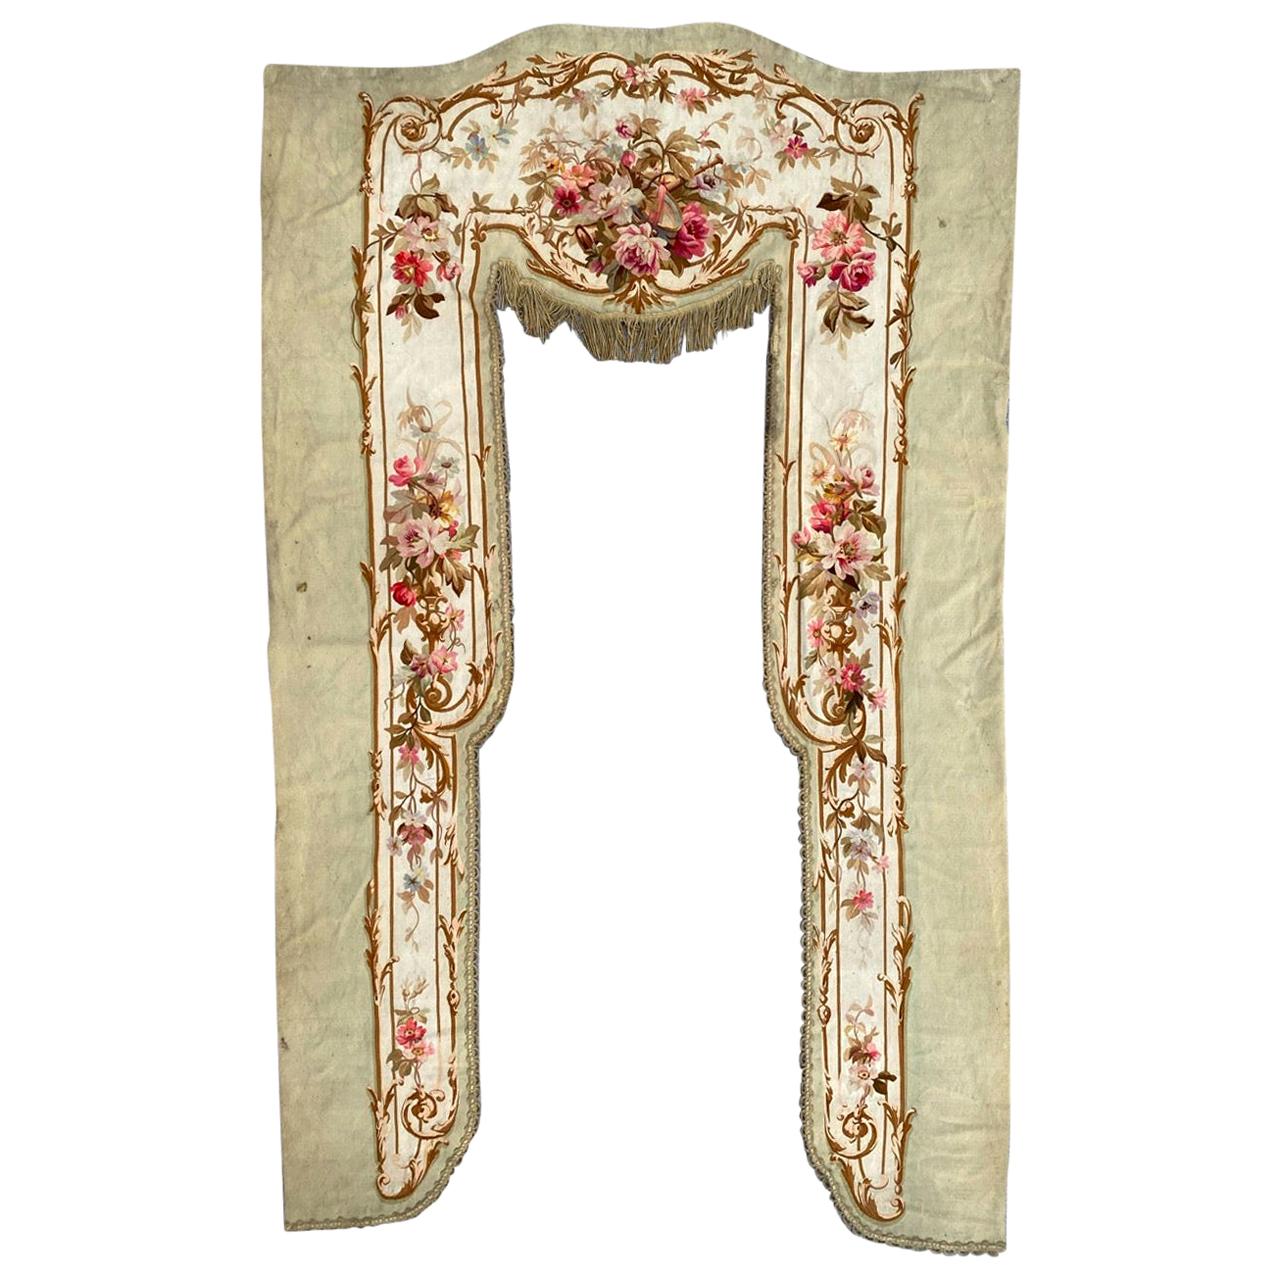 Bobyrug’s Wonderful French Valance Aubusson Tapestry For Sale